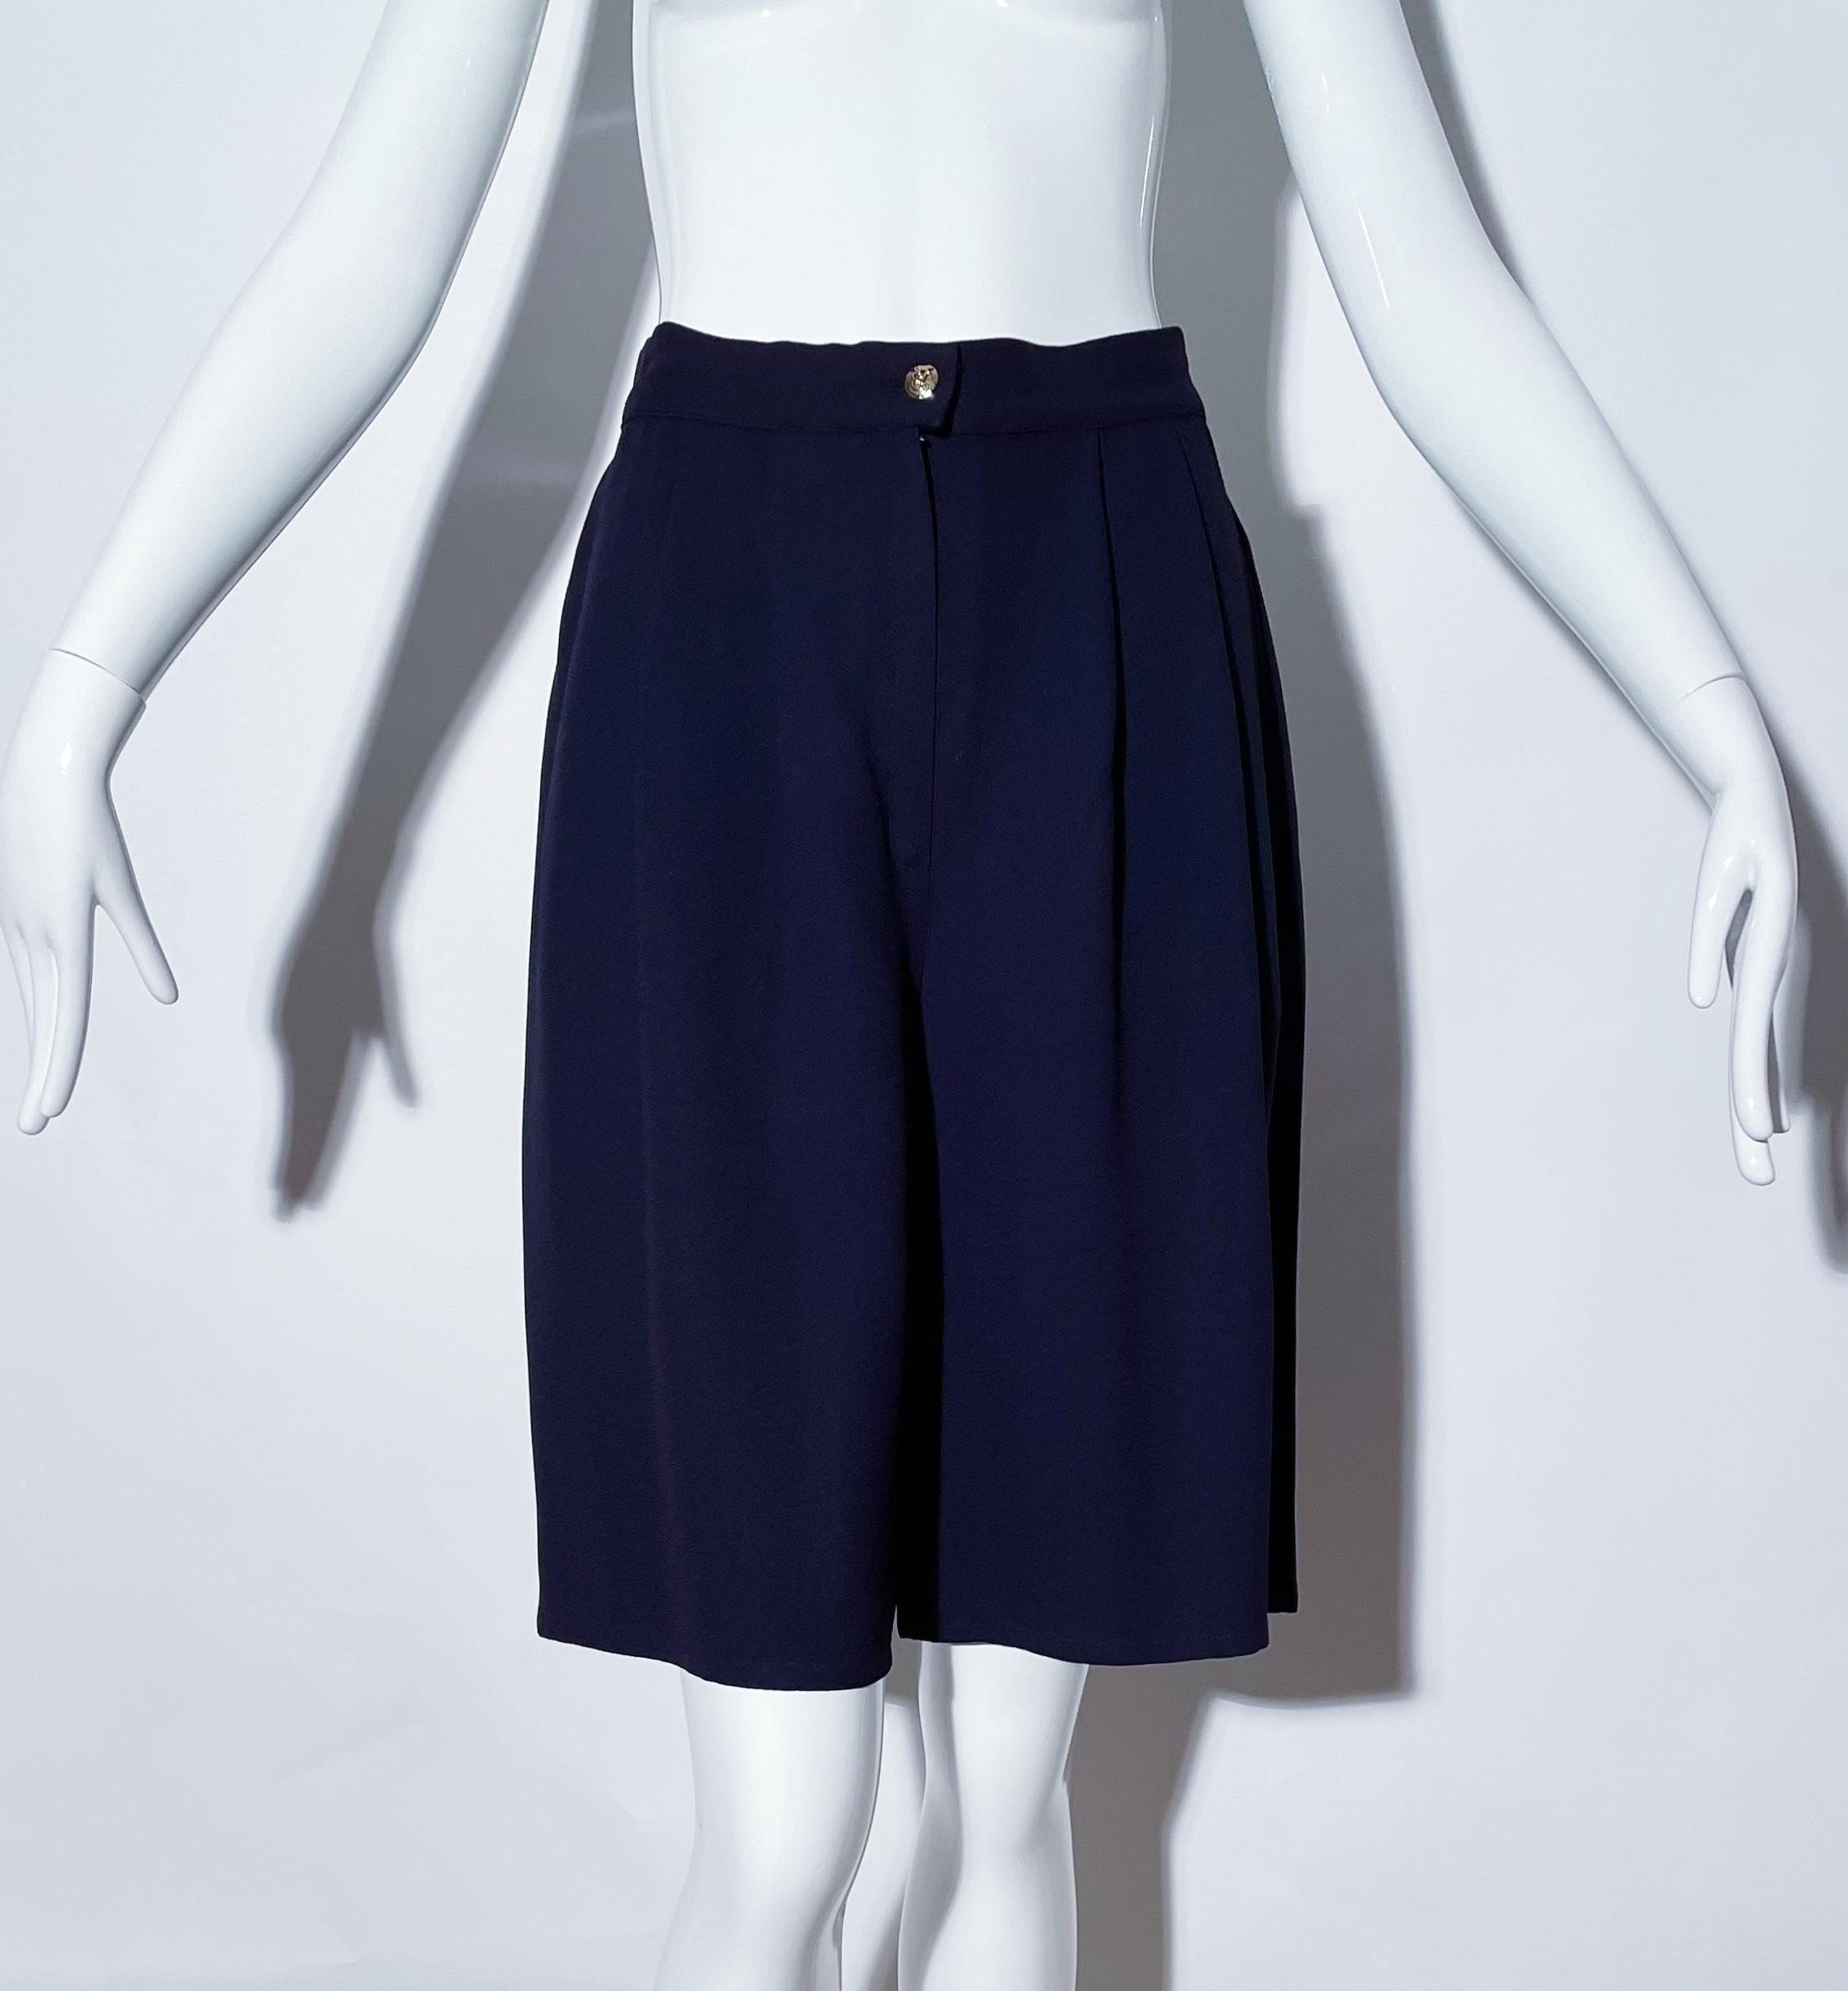 Navy Bermuda shorts. Front pleats. Front pockets. Front zipper closure. Acetate and rayon. Made in France. 
*Condition: excellent vintage condition. No visible flaws.

Measurements Taken Laying Flat (inches)—
Waist:  28 in.
Hip: 42 in.
Rise: 13